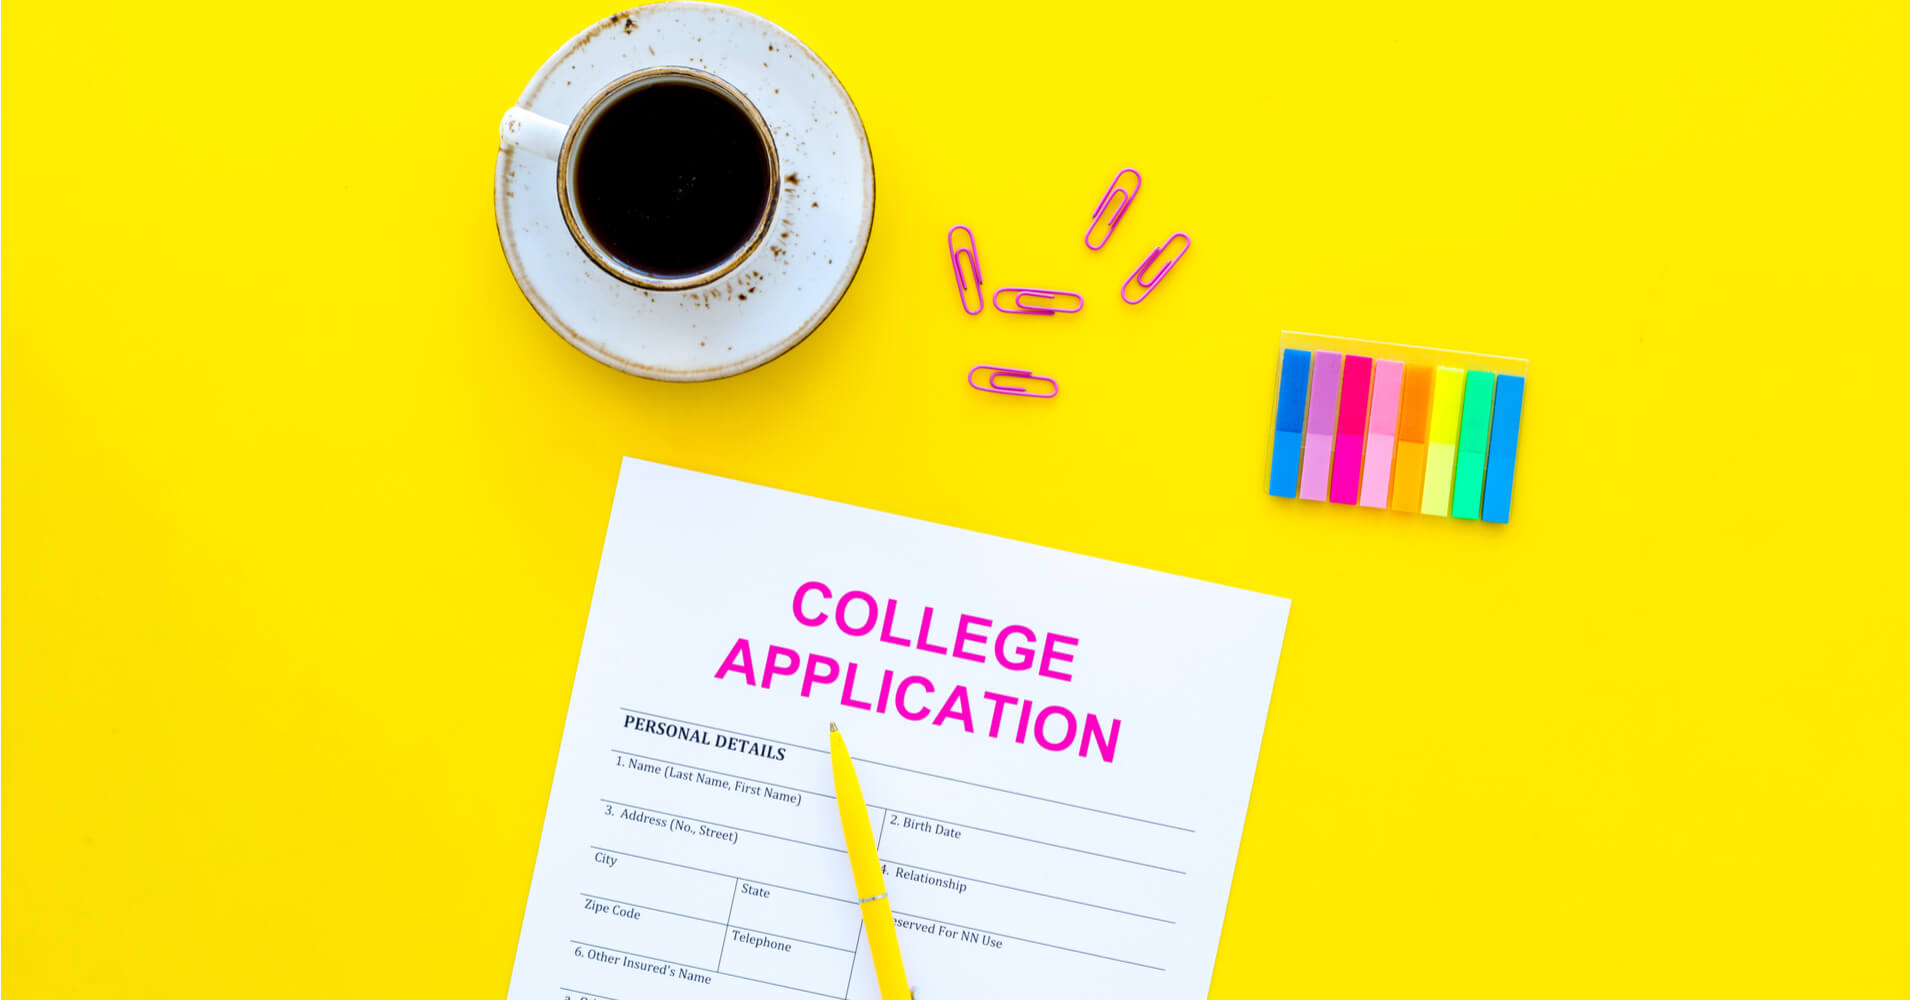 College Admissions FAQ All Your Questions About Applying to College